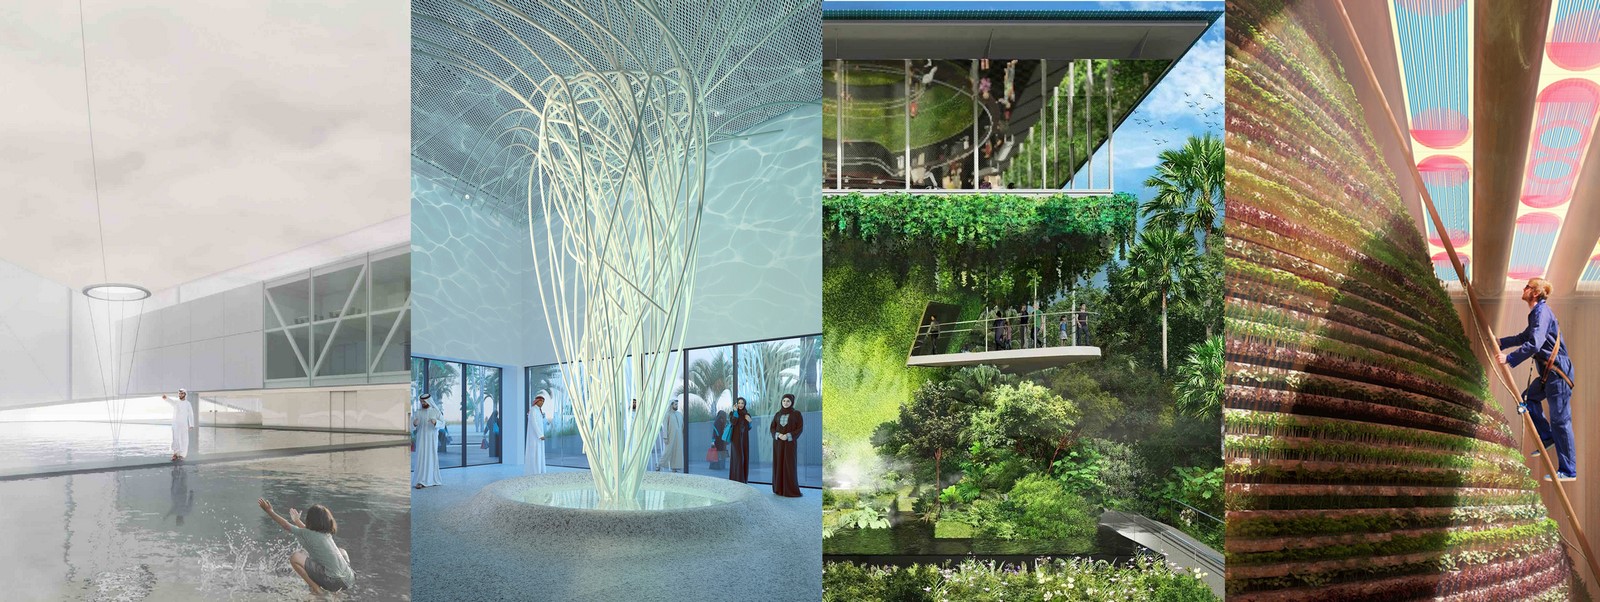 All You Need to Know About the Pavilions at Expo 2020 - Sheet55